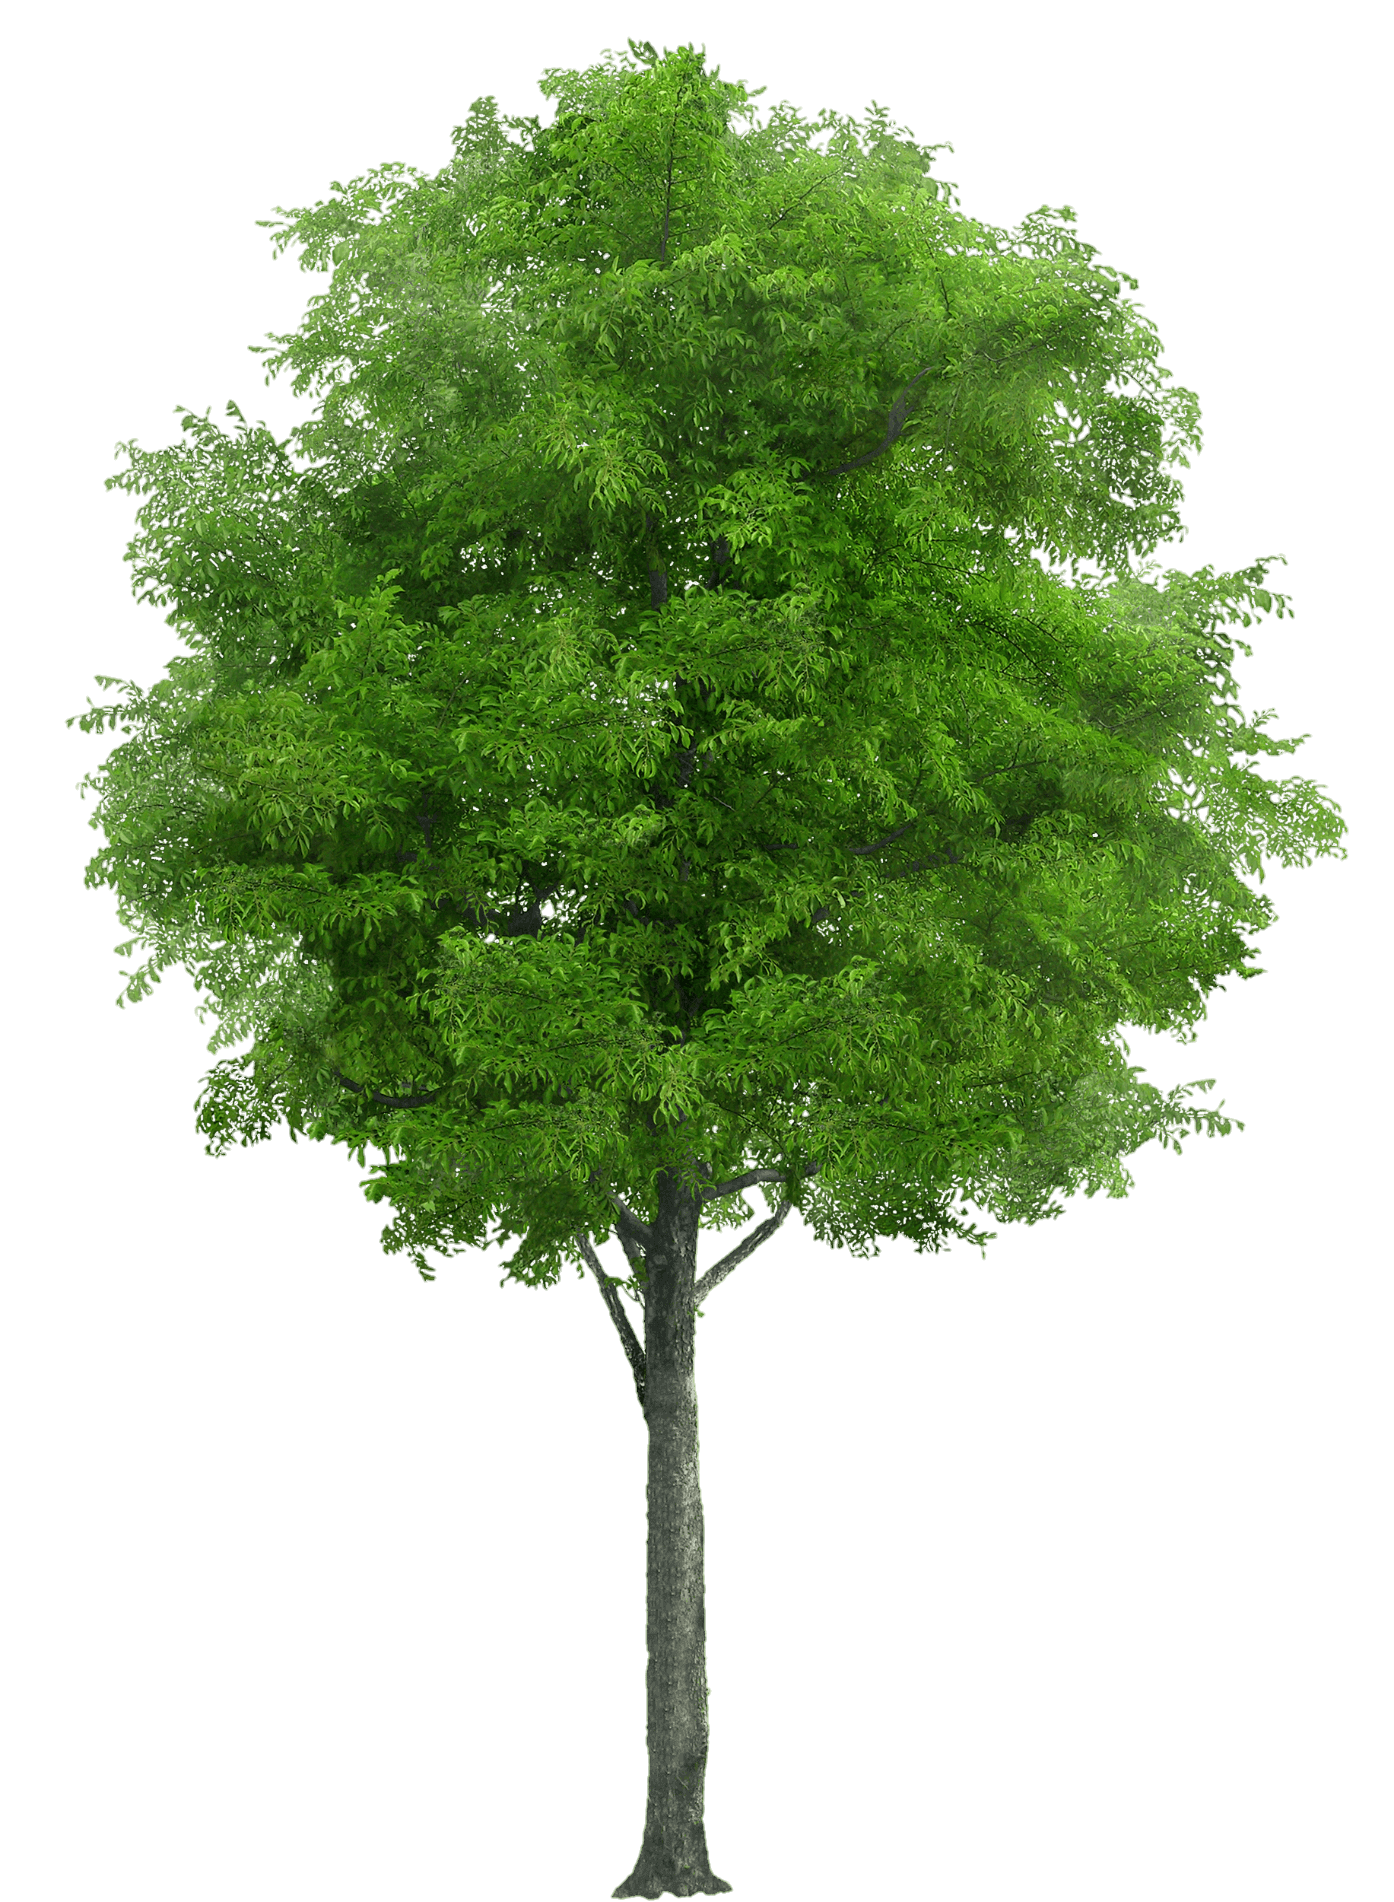 tree-png-from-pngfre-22-1